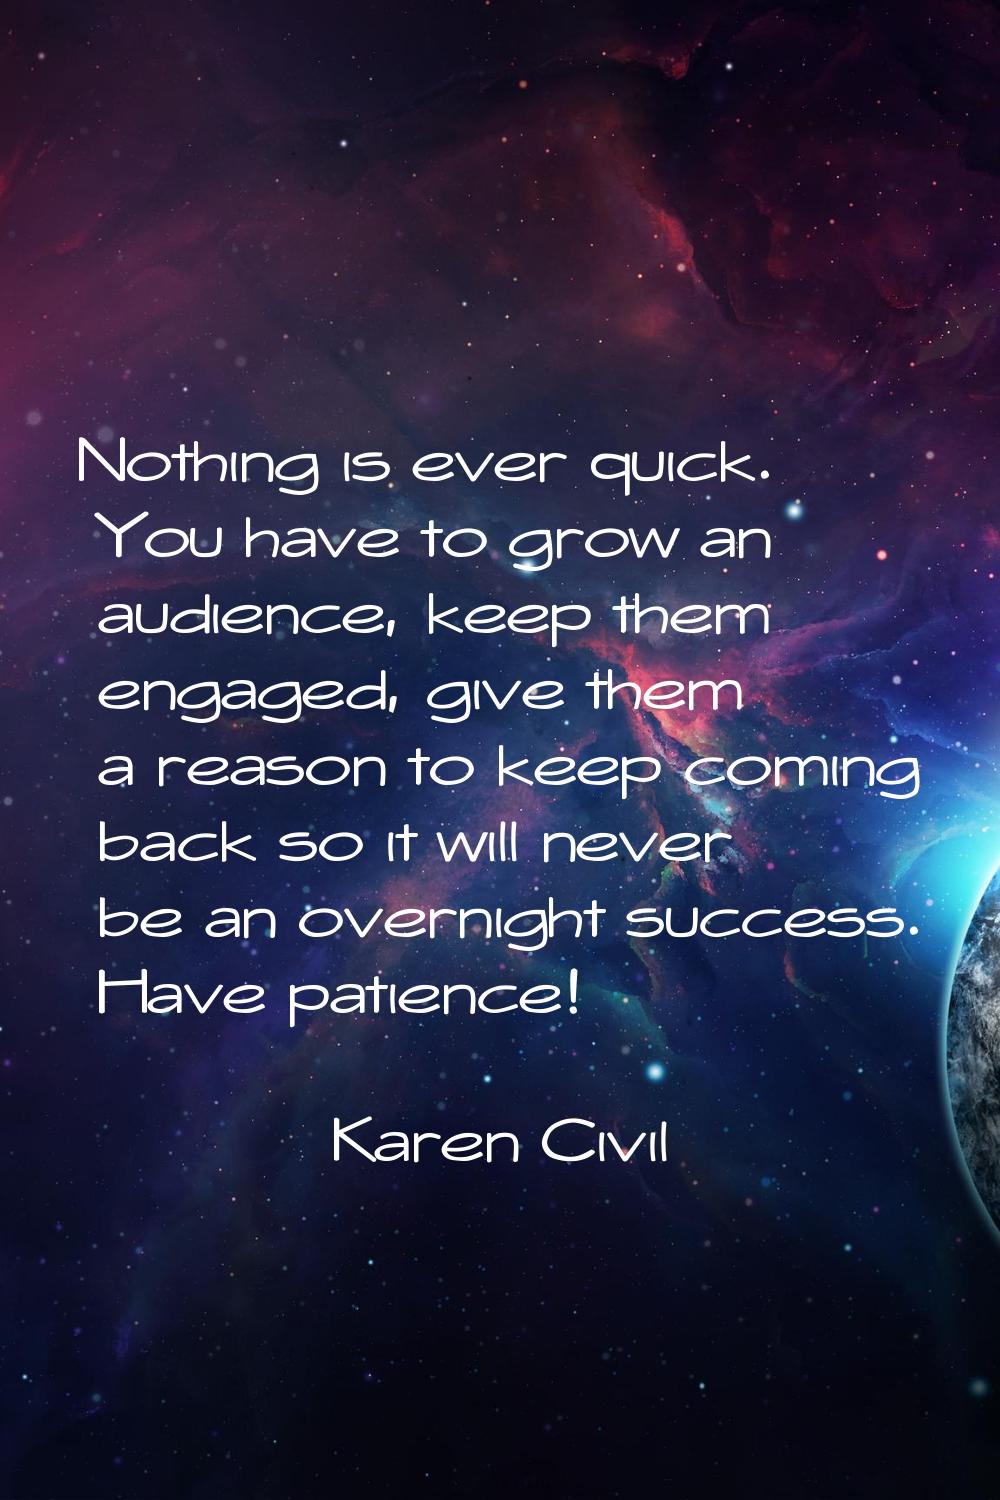 Nothing is ever quick. You have to grow an audience, keep them engaged, give them a reason to keep 